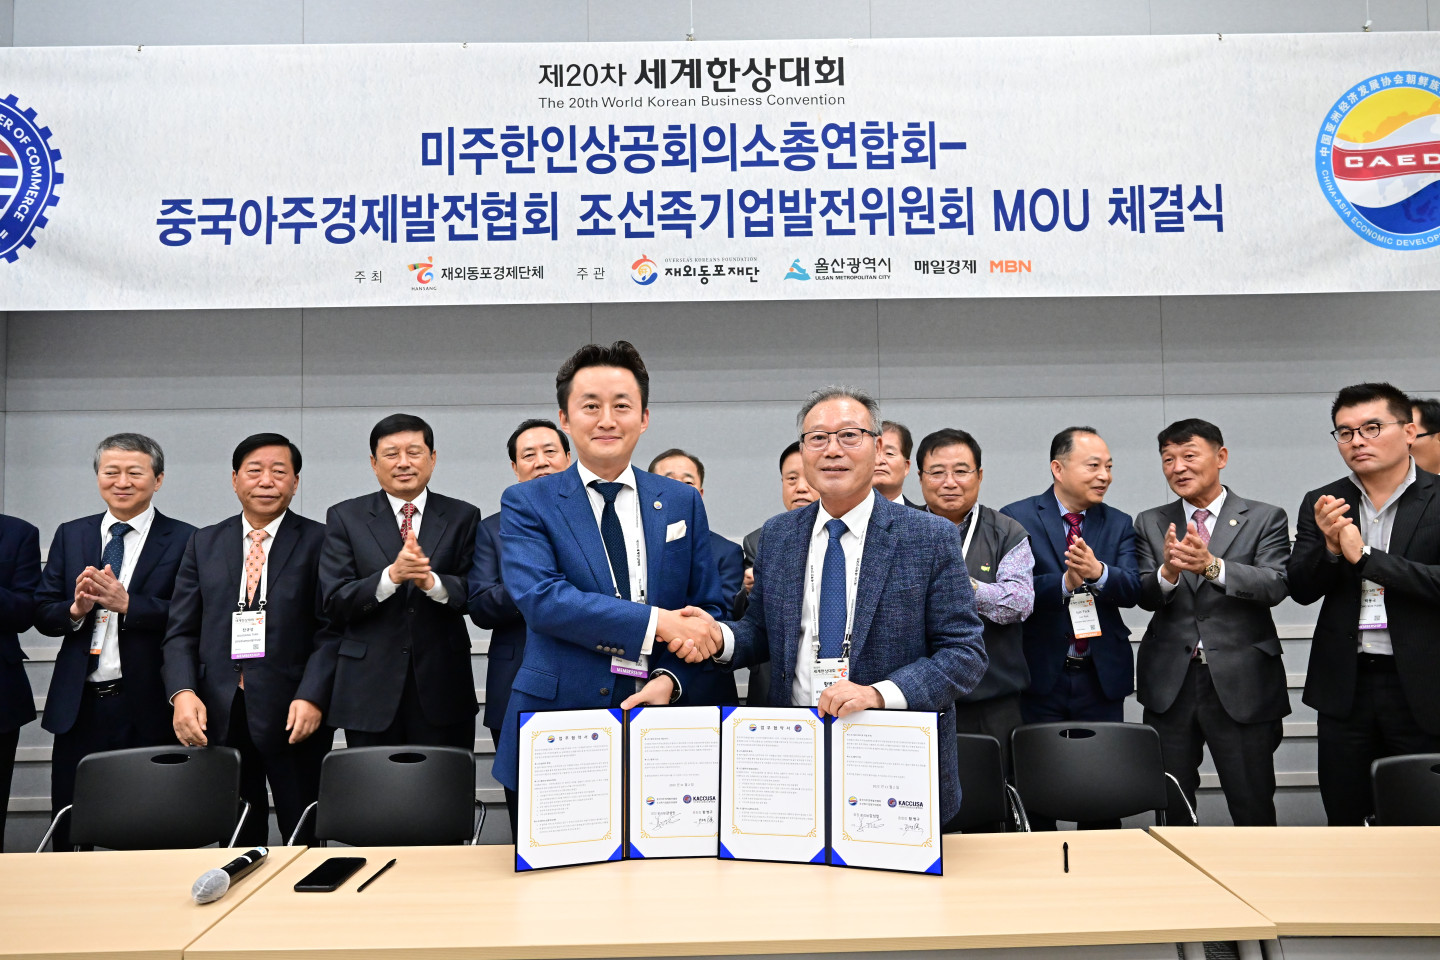 MOU signing ceremony between the Korean American Chamber of Commerce and the China-Asia Economic Development Association